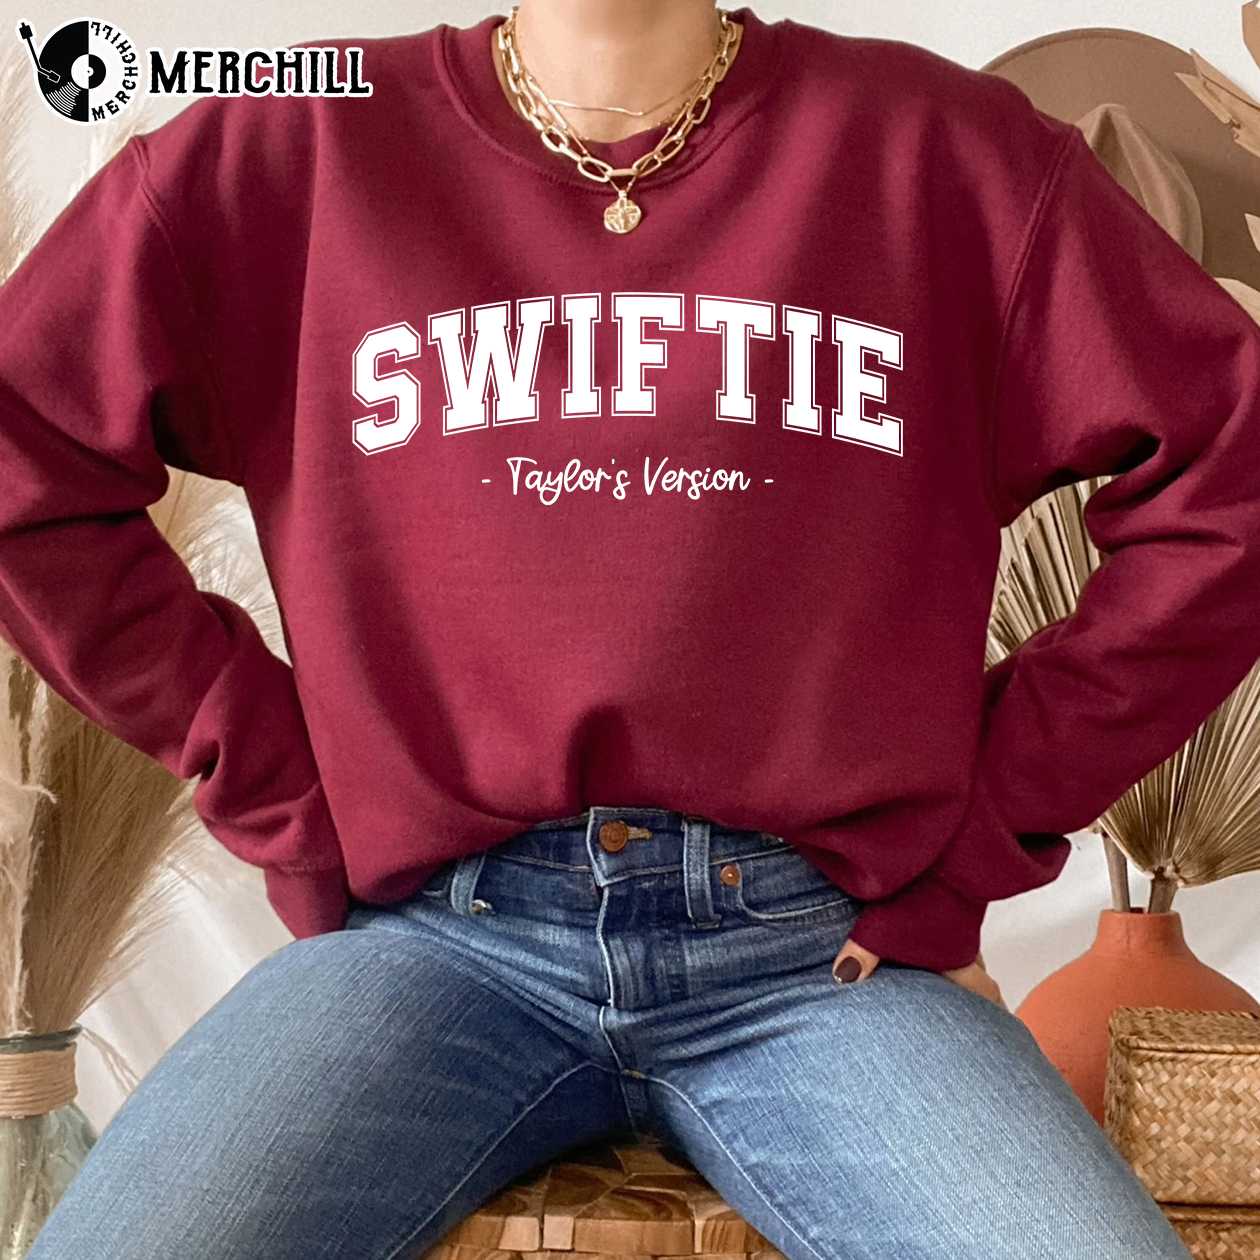 The Best Taylor Swift Merch For Swifties